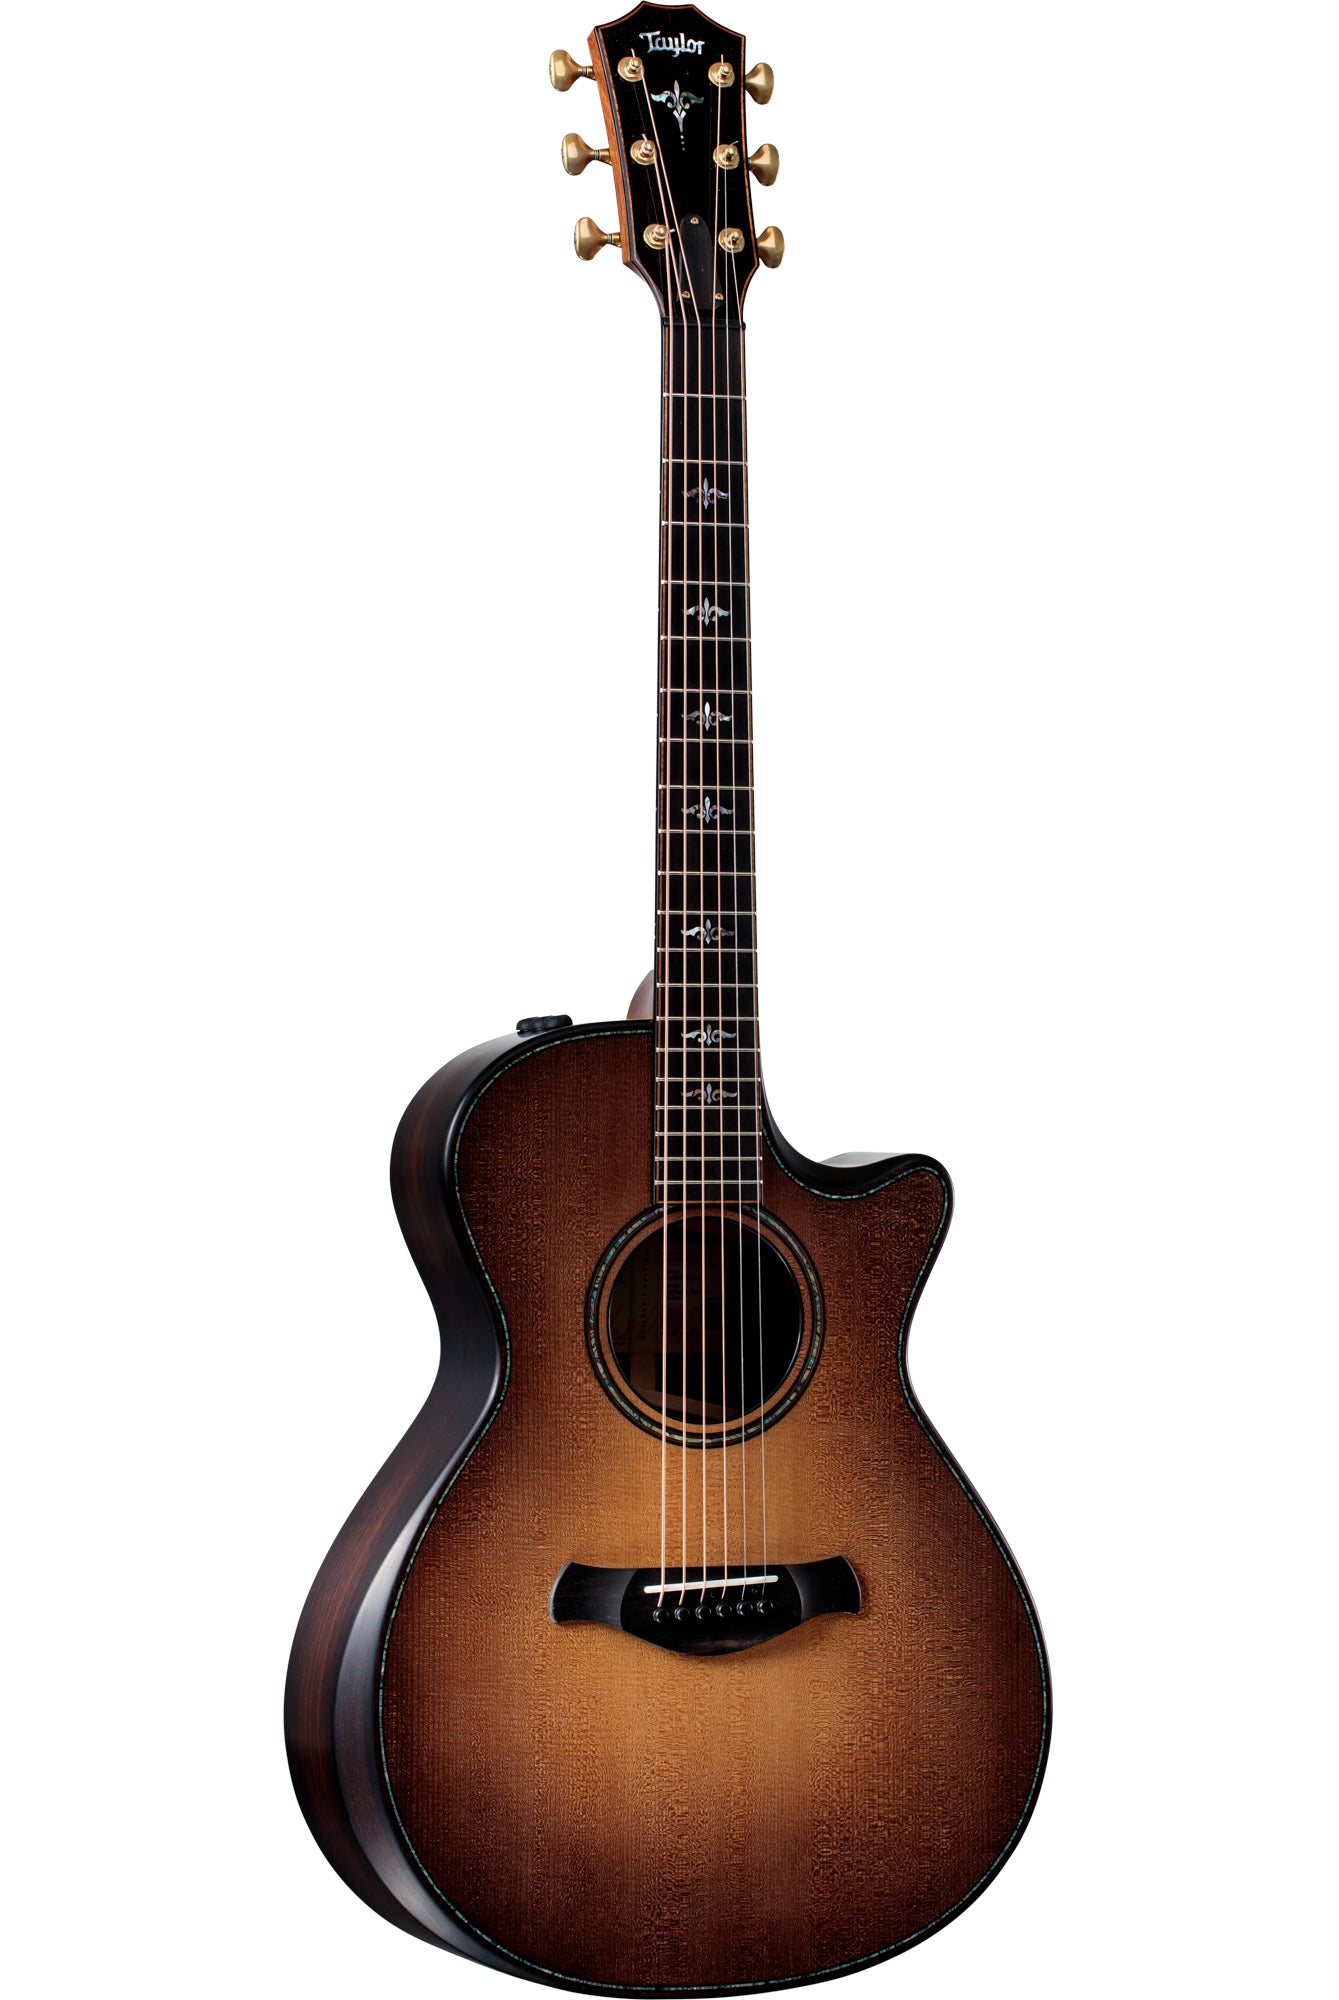 Full view of Taylor Builder's Edition 912ce WHB V-Class Bracing Wild Honey Burst w/case